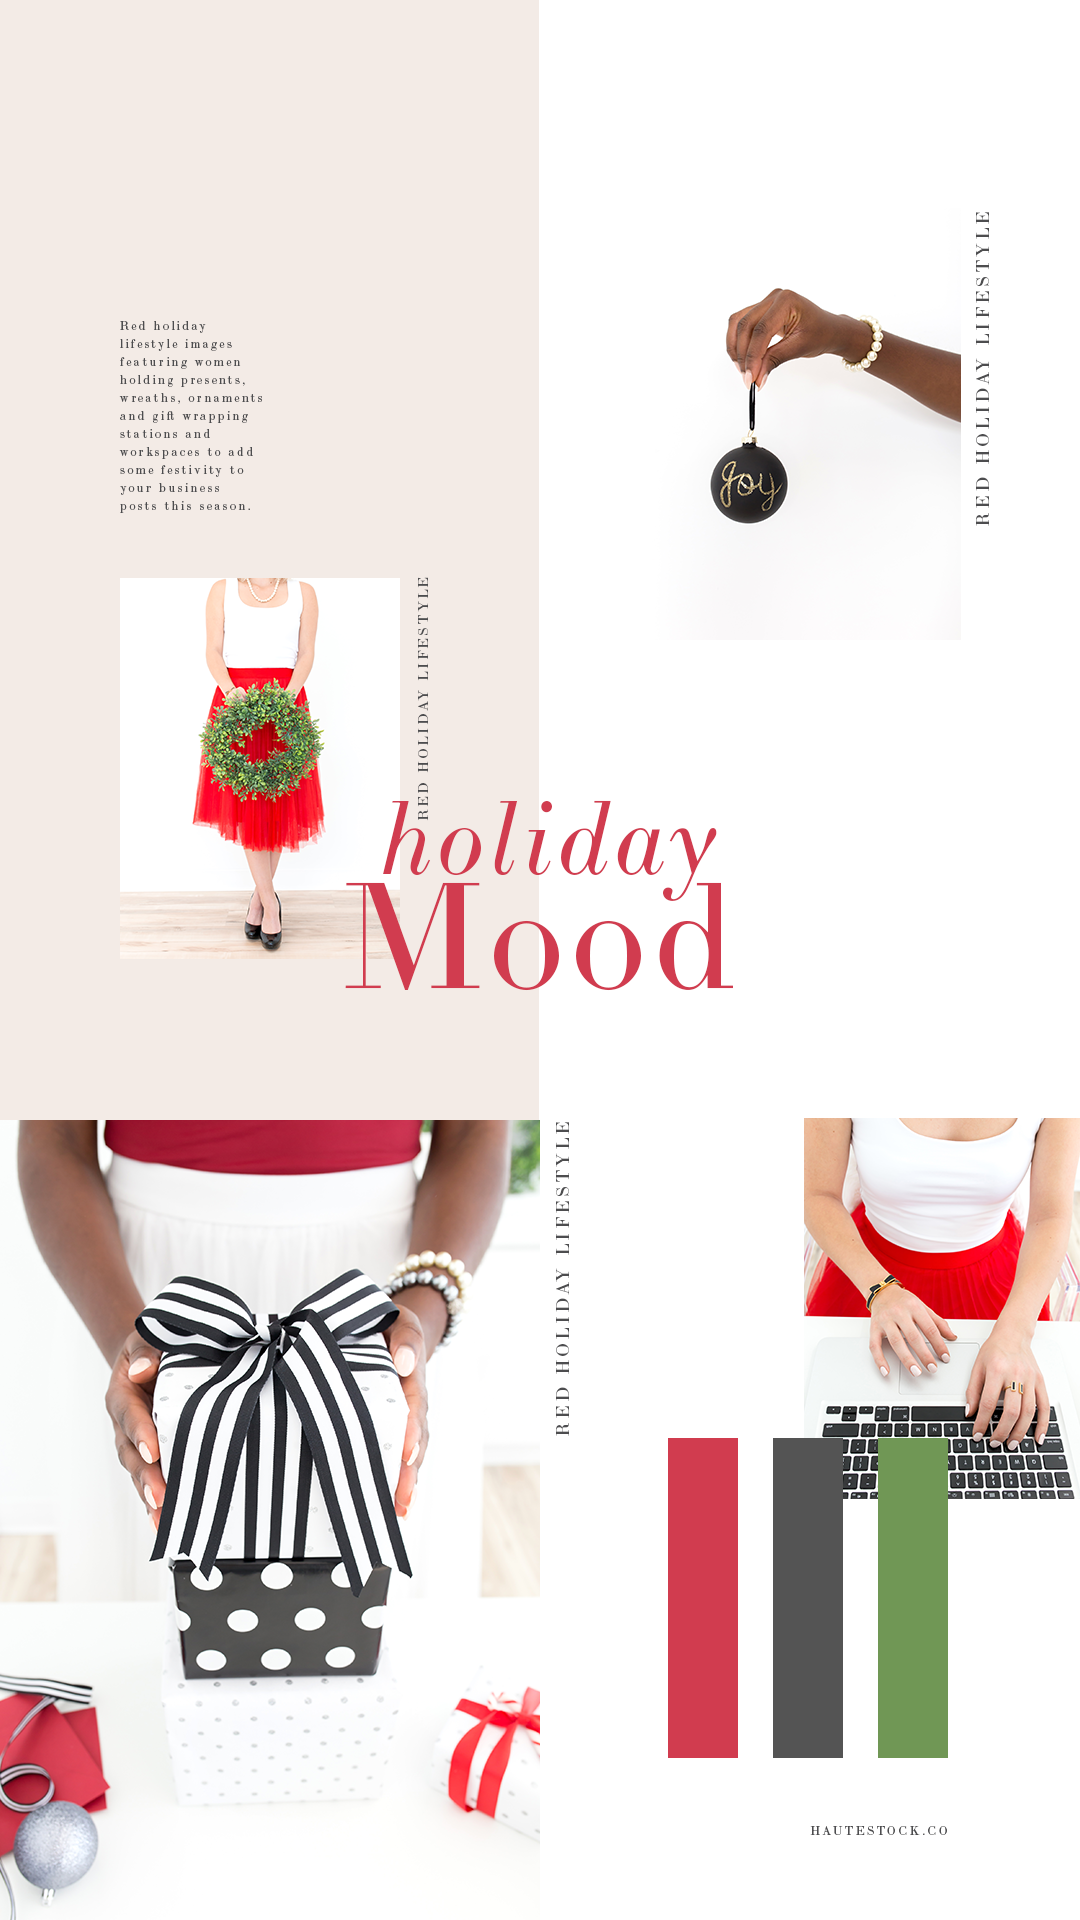 Red holiday lifestyle images featuring women holding presents, wreaths, ornaments and gift wrapping stations and workspaces to add some festivity to your business posts this season.